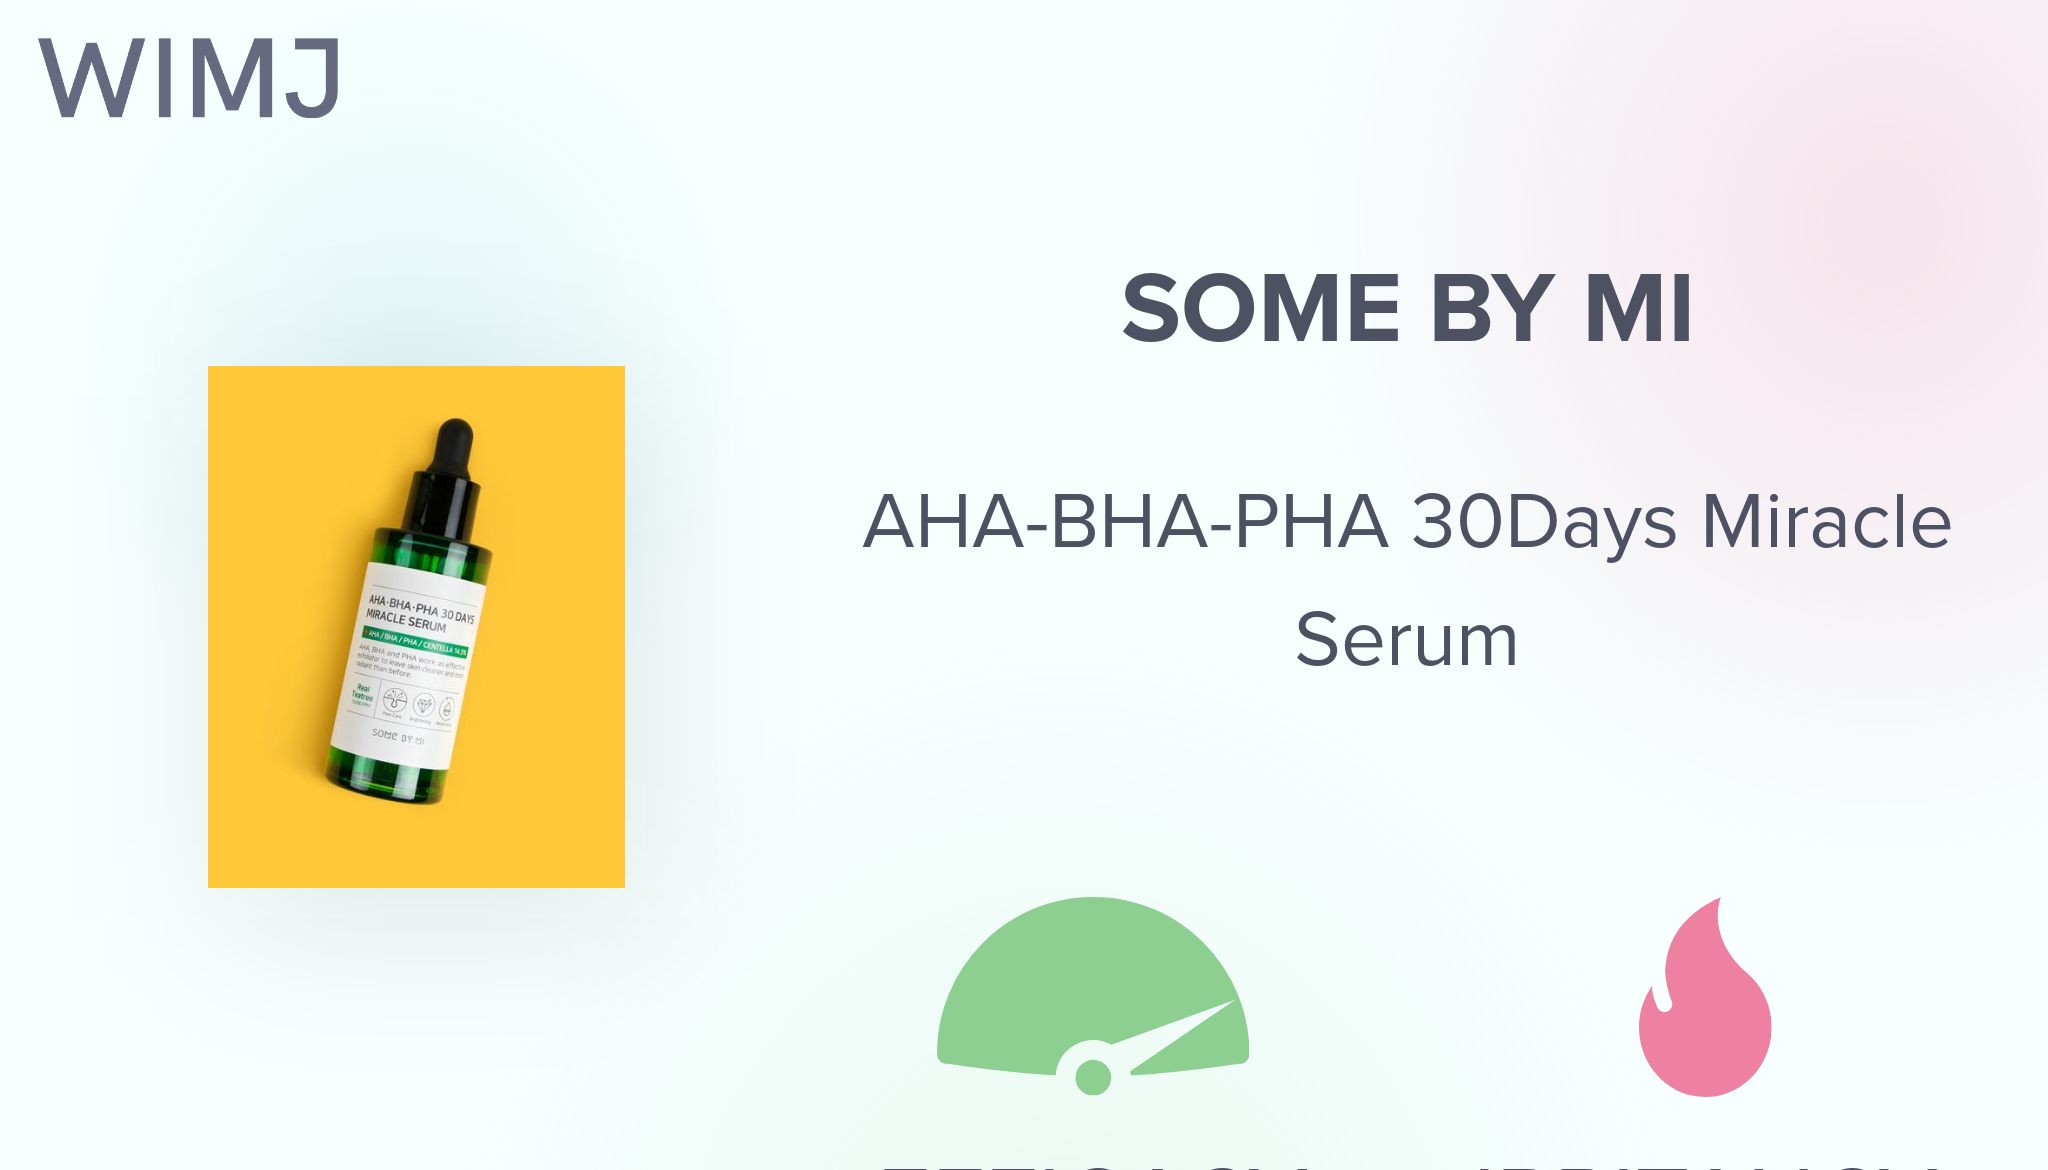 Review: Some By Mi - AHA-BHA-PHA 30Days Miracle Serum